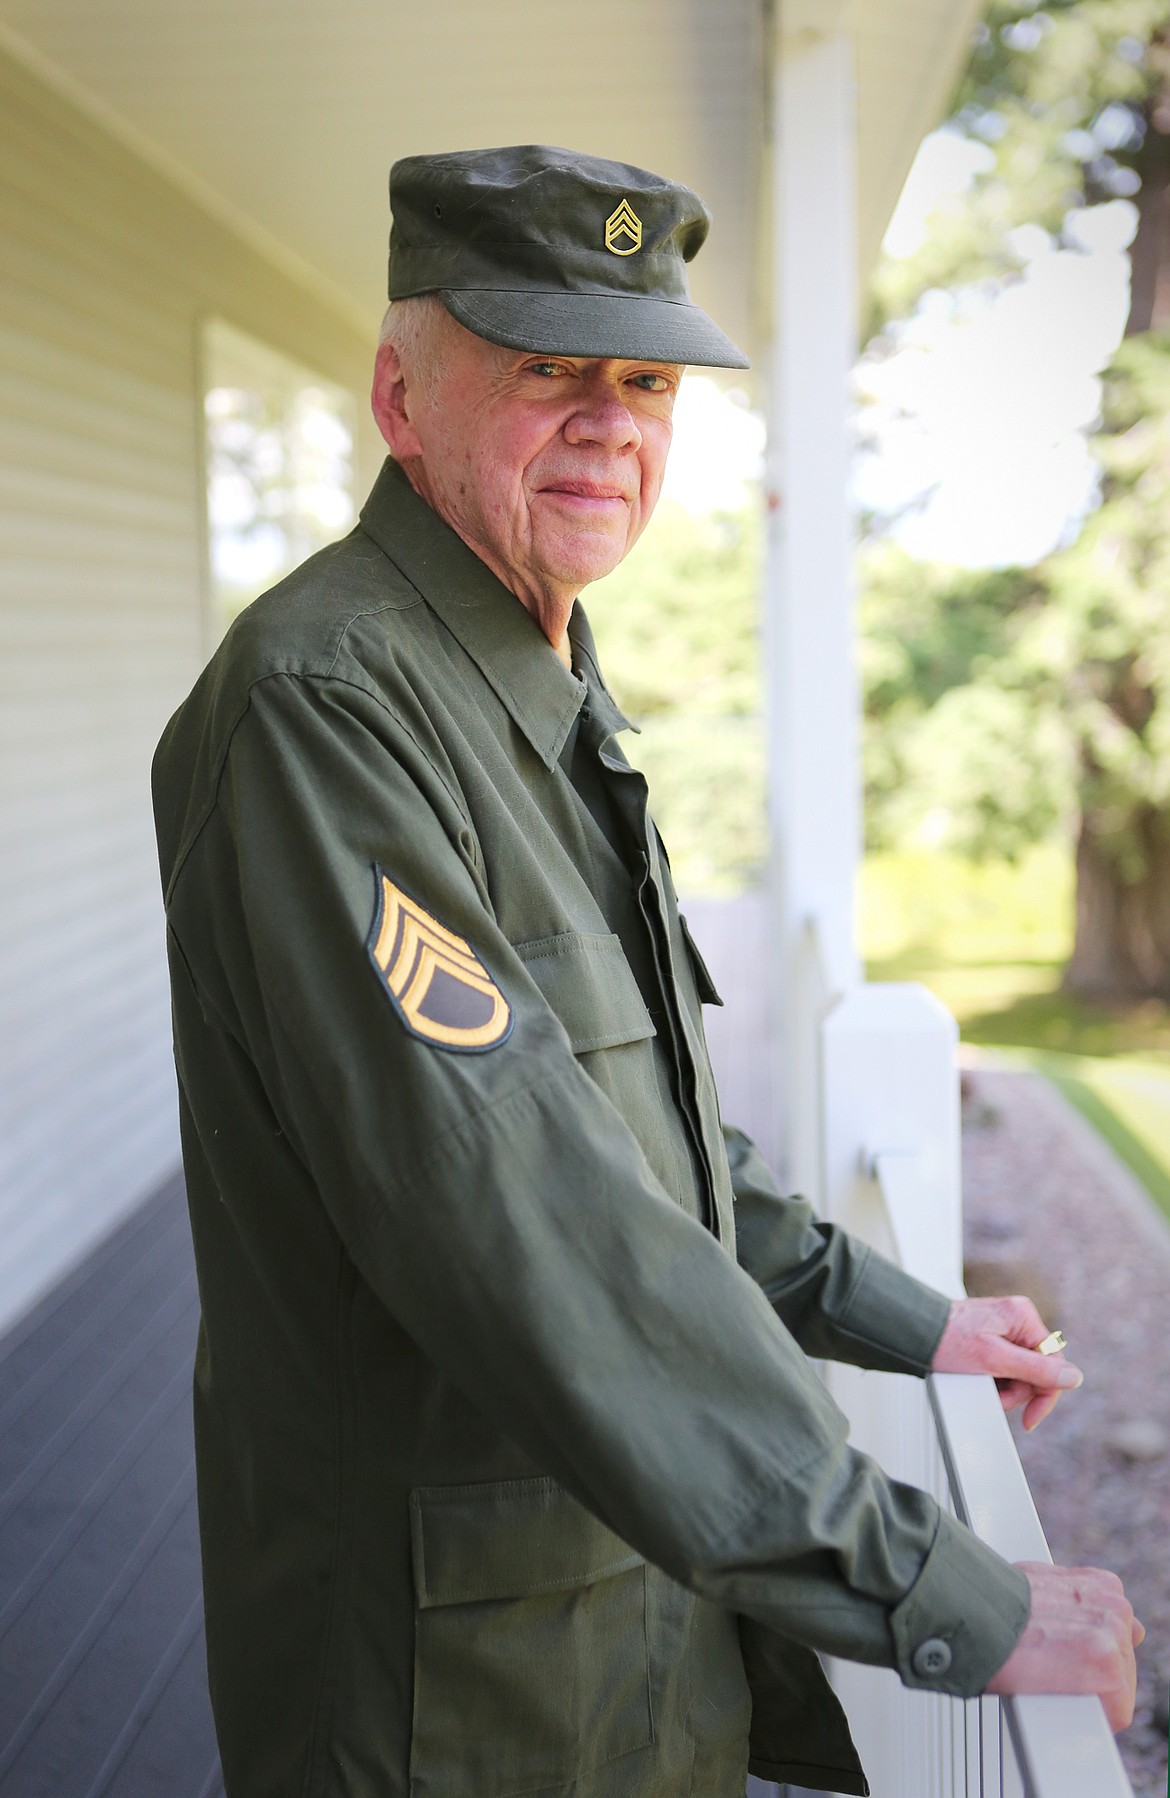 Frank Tumbelty at his home in Kalispell wearing his Army uniform. (Mackenzie Reiss/Daily Inter Lake)